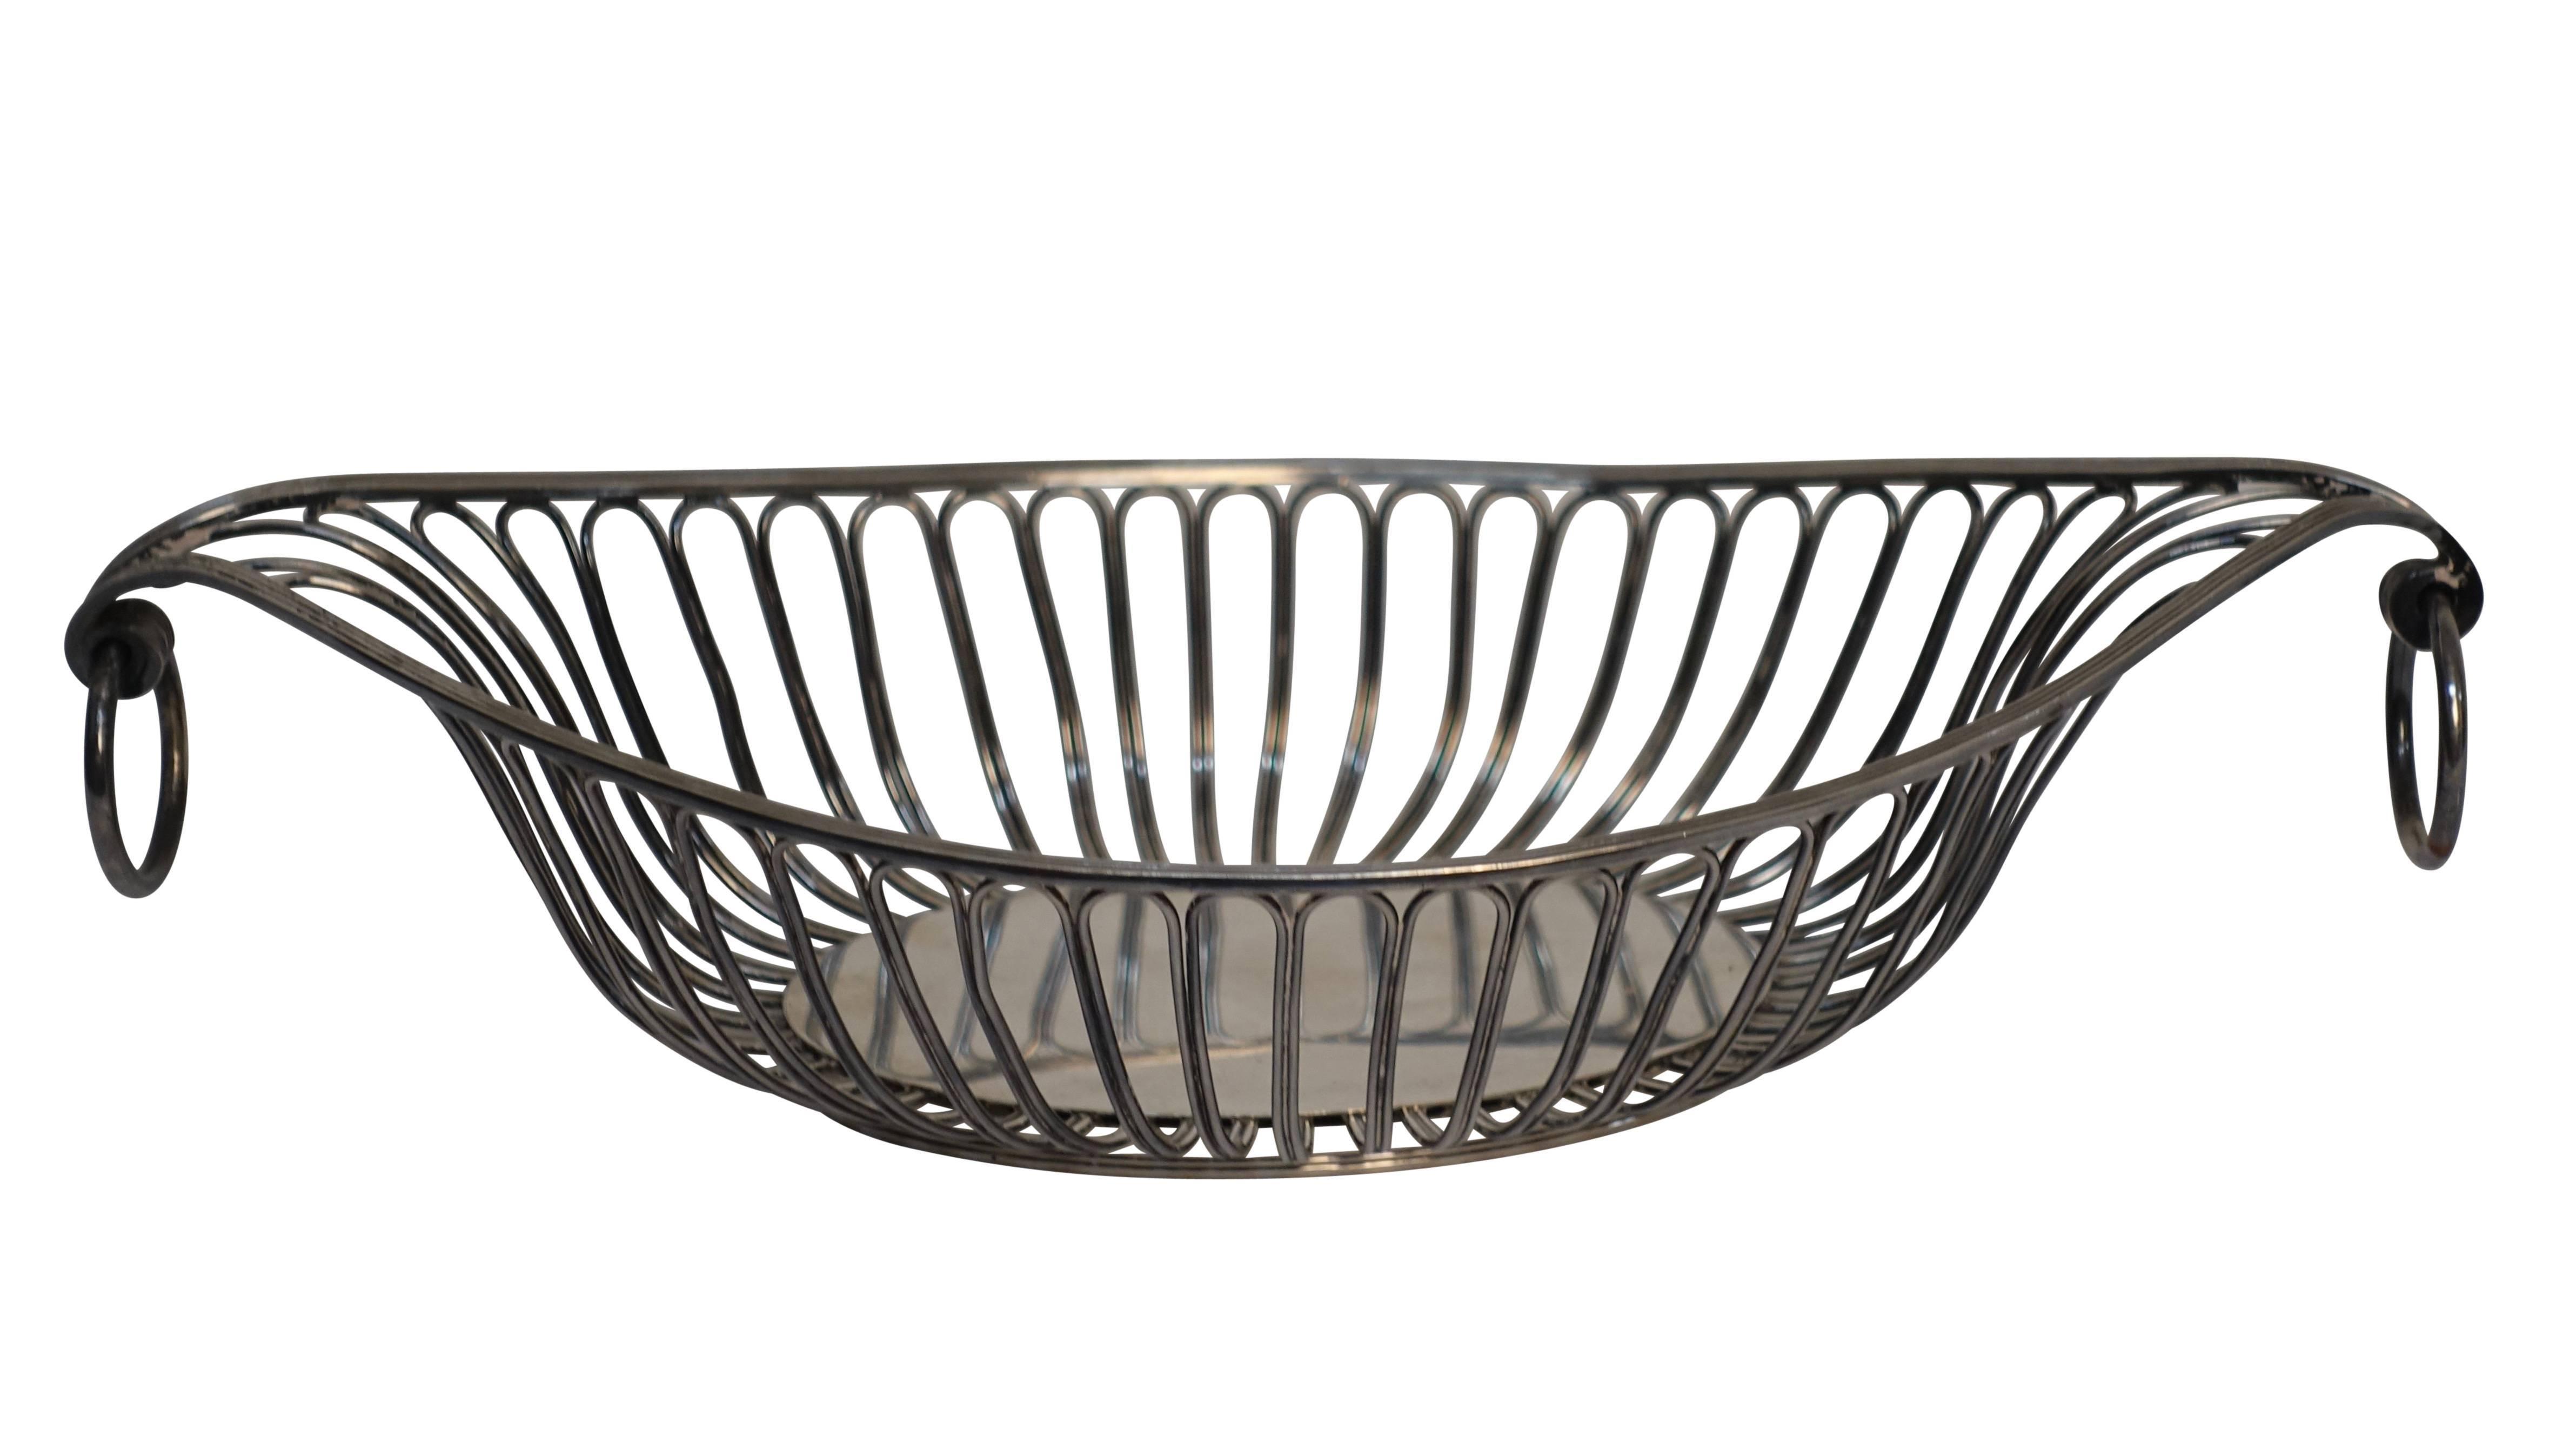 Large Sheffield silver plate Regency period gondola shape bread basket with loop ring handles, England, early 19th century.